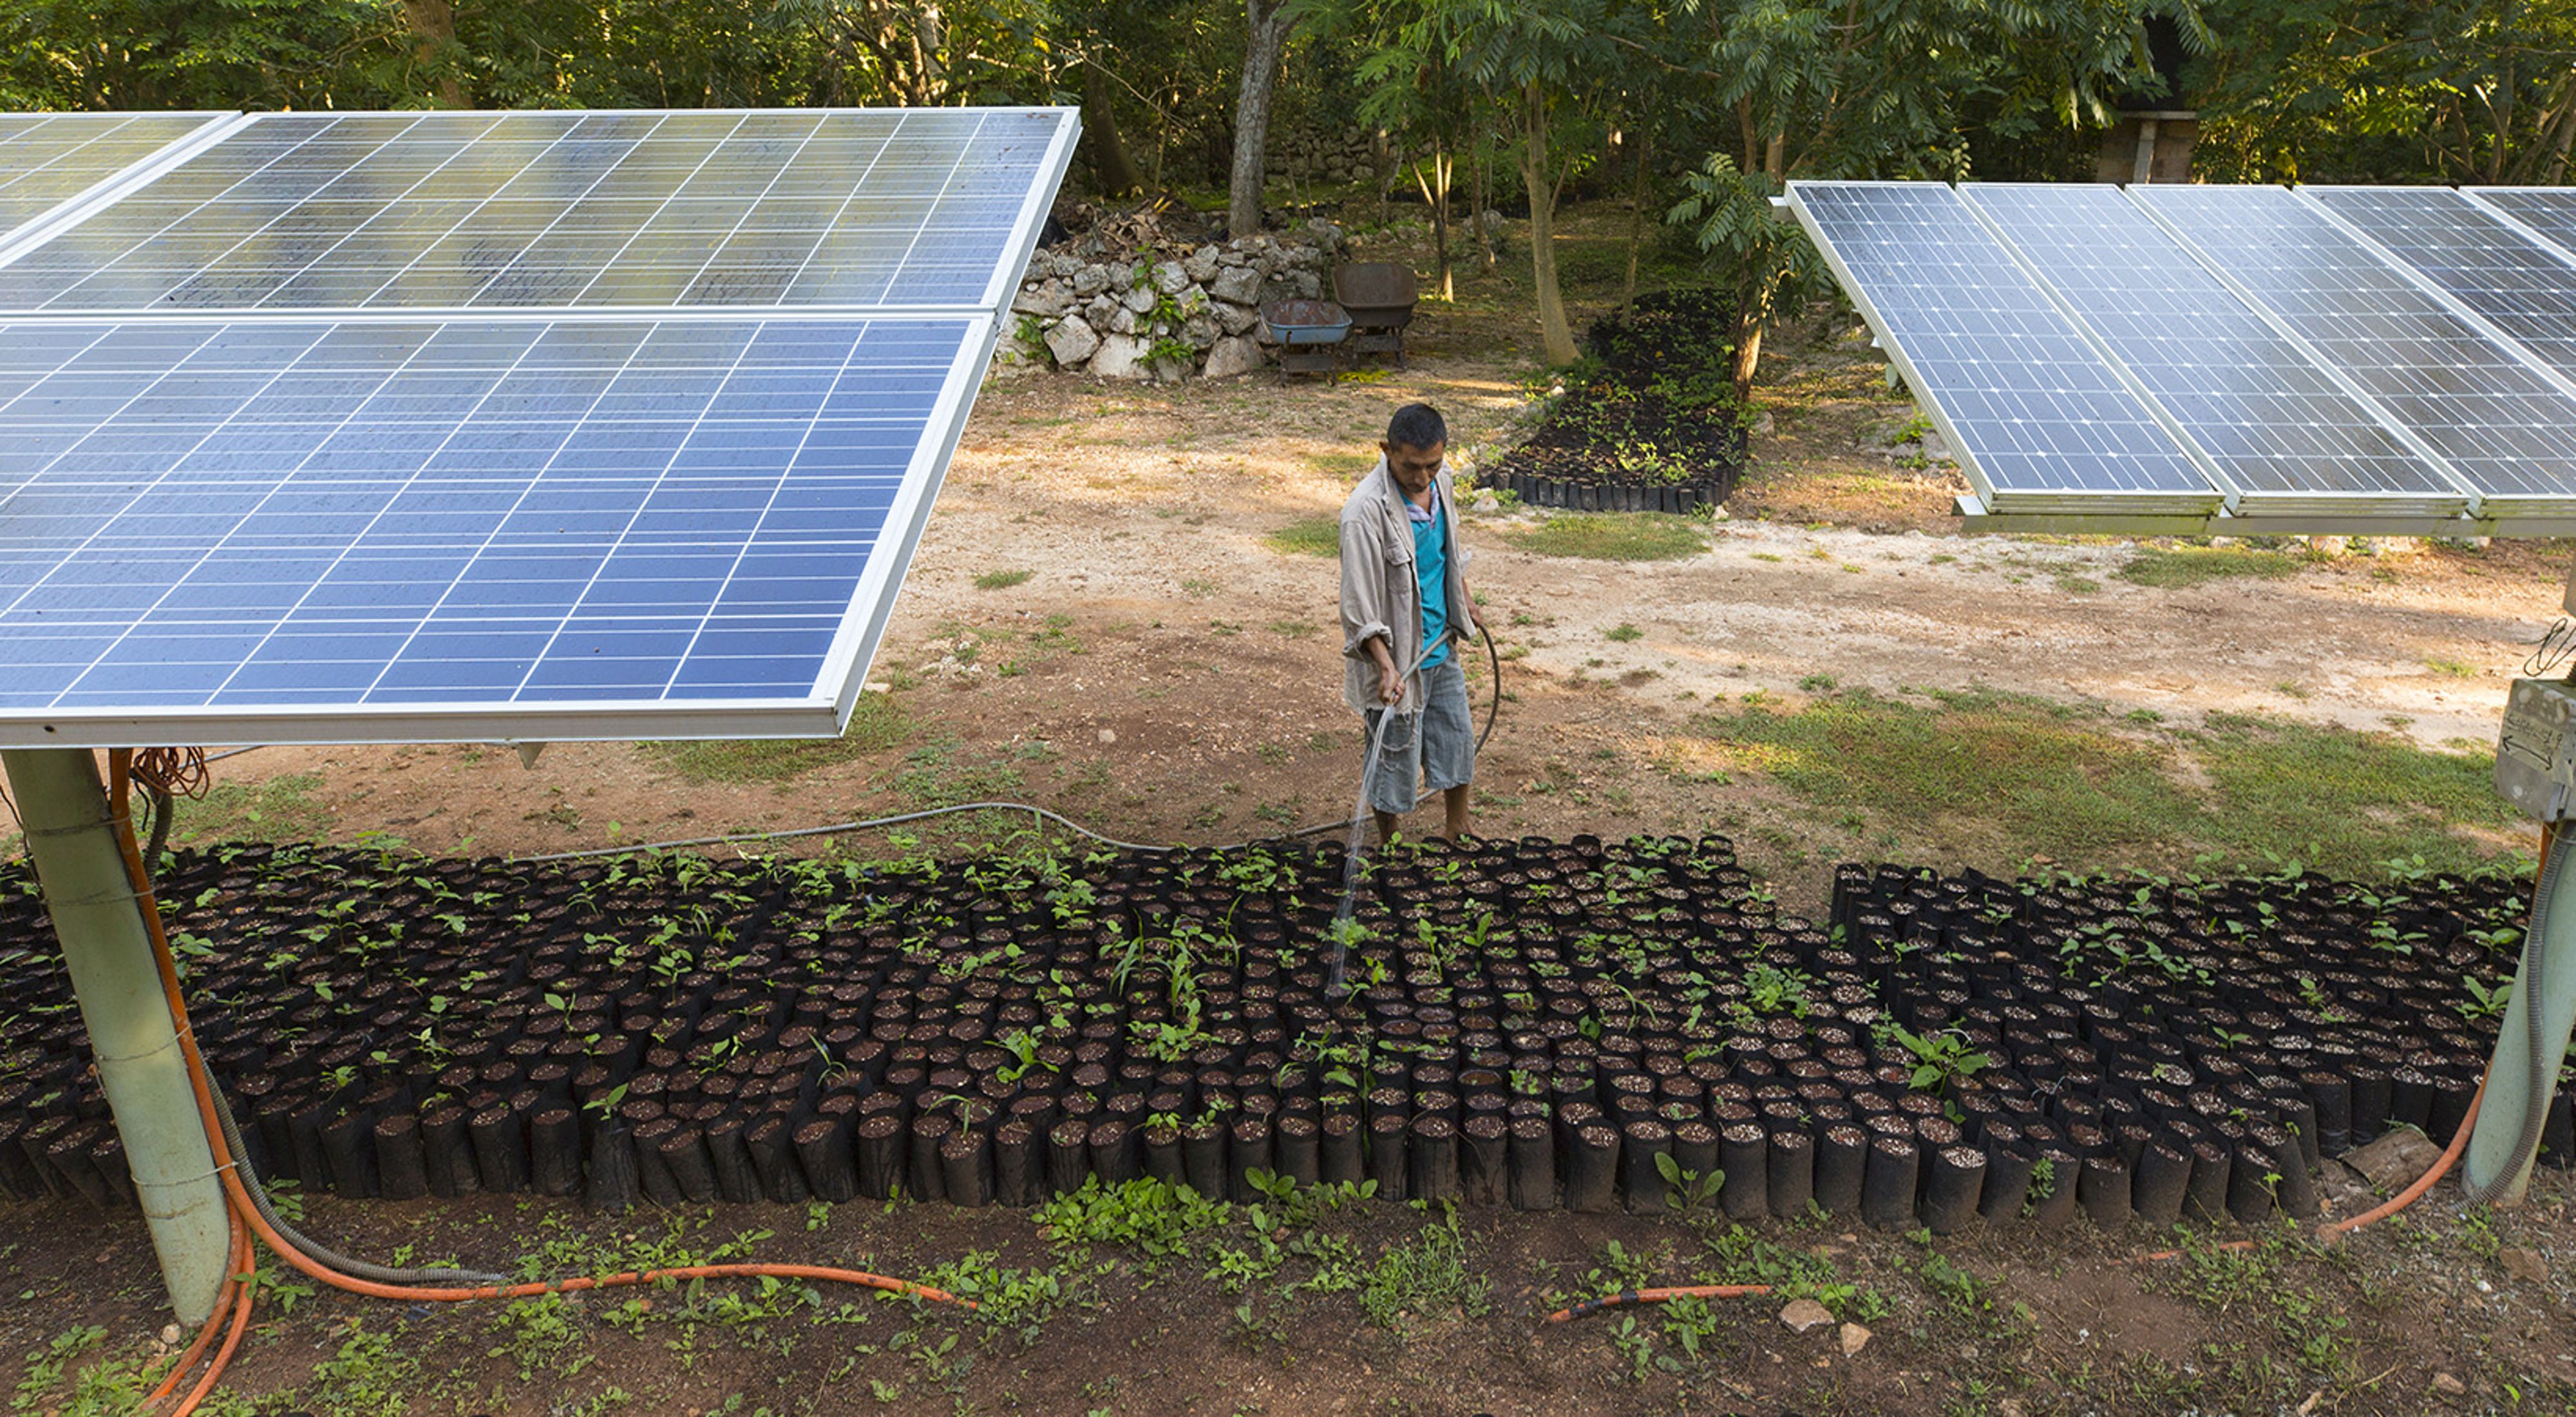 Elizar Samuel Gamara waters the plantings under the solar panels at the Kaxil Kiuic Biocultural Reserve © Erich Schlegel